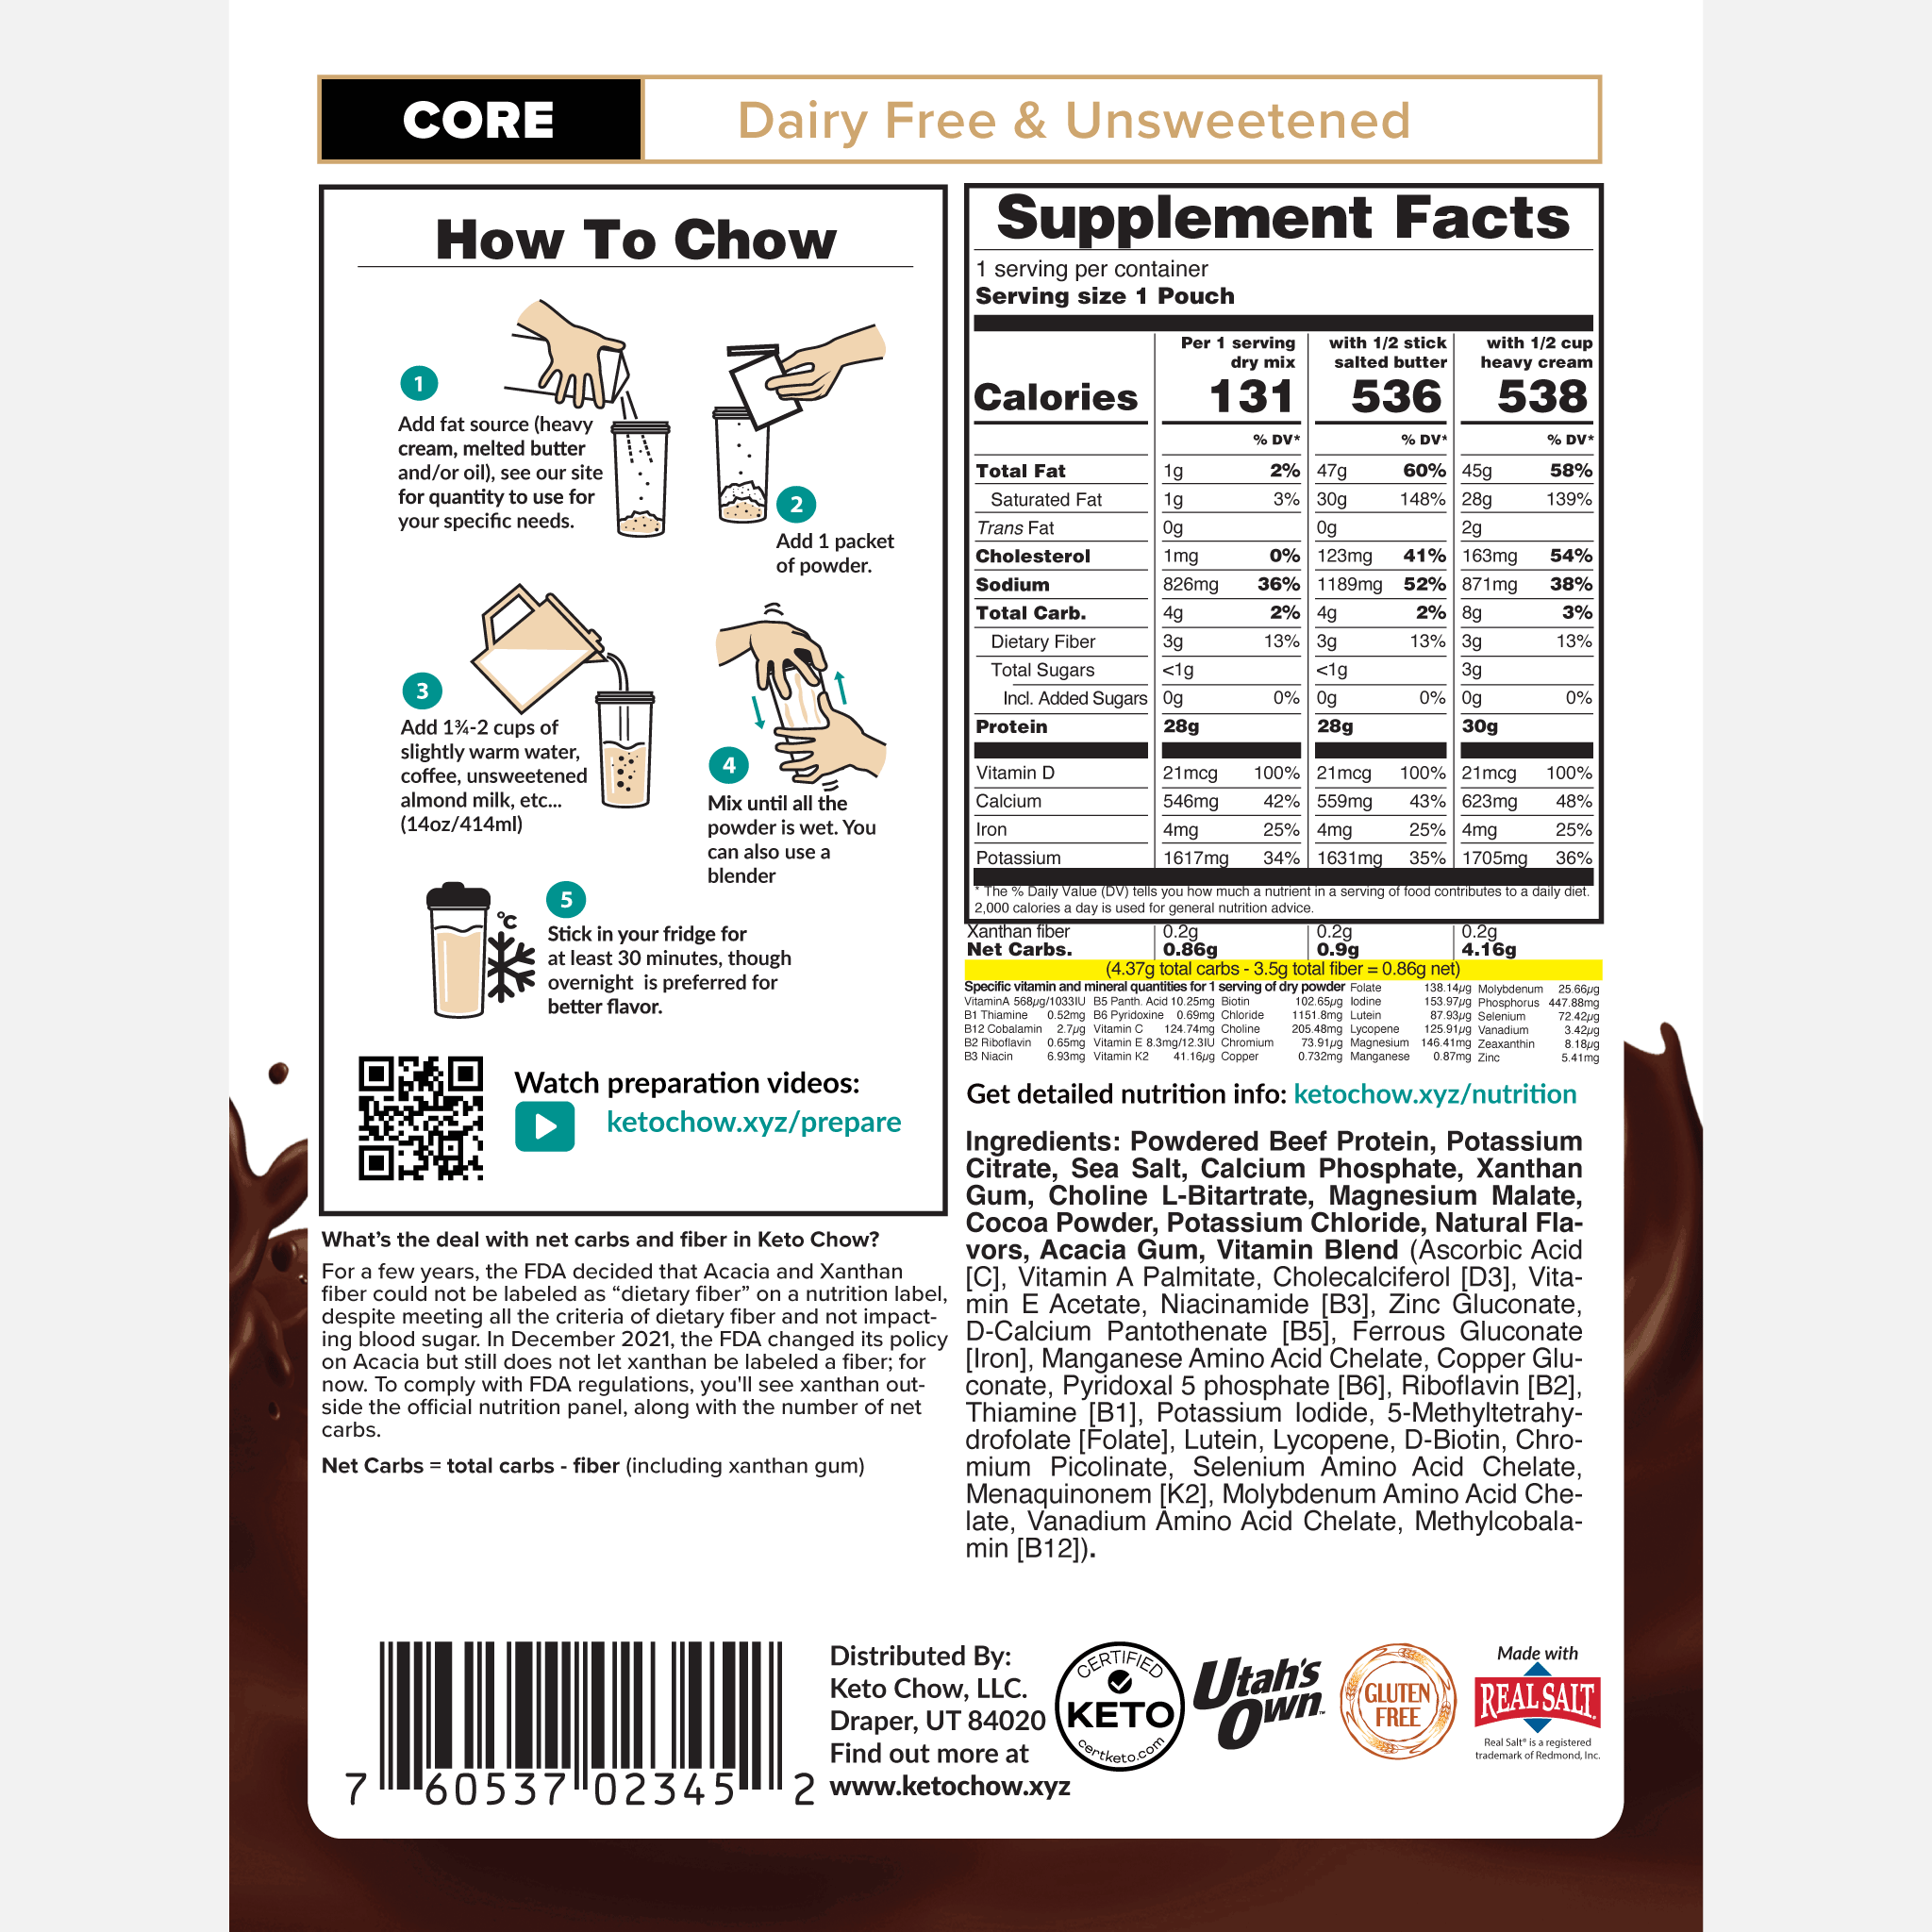 Unsweetened Keto Chow Core nutrition facts